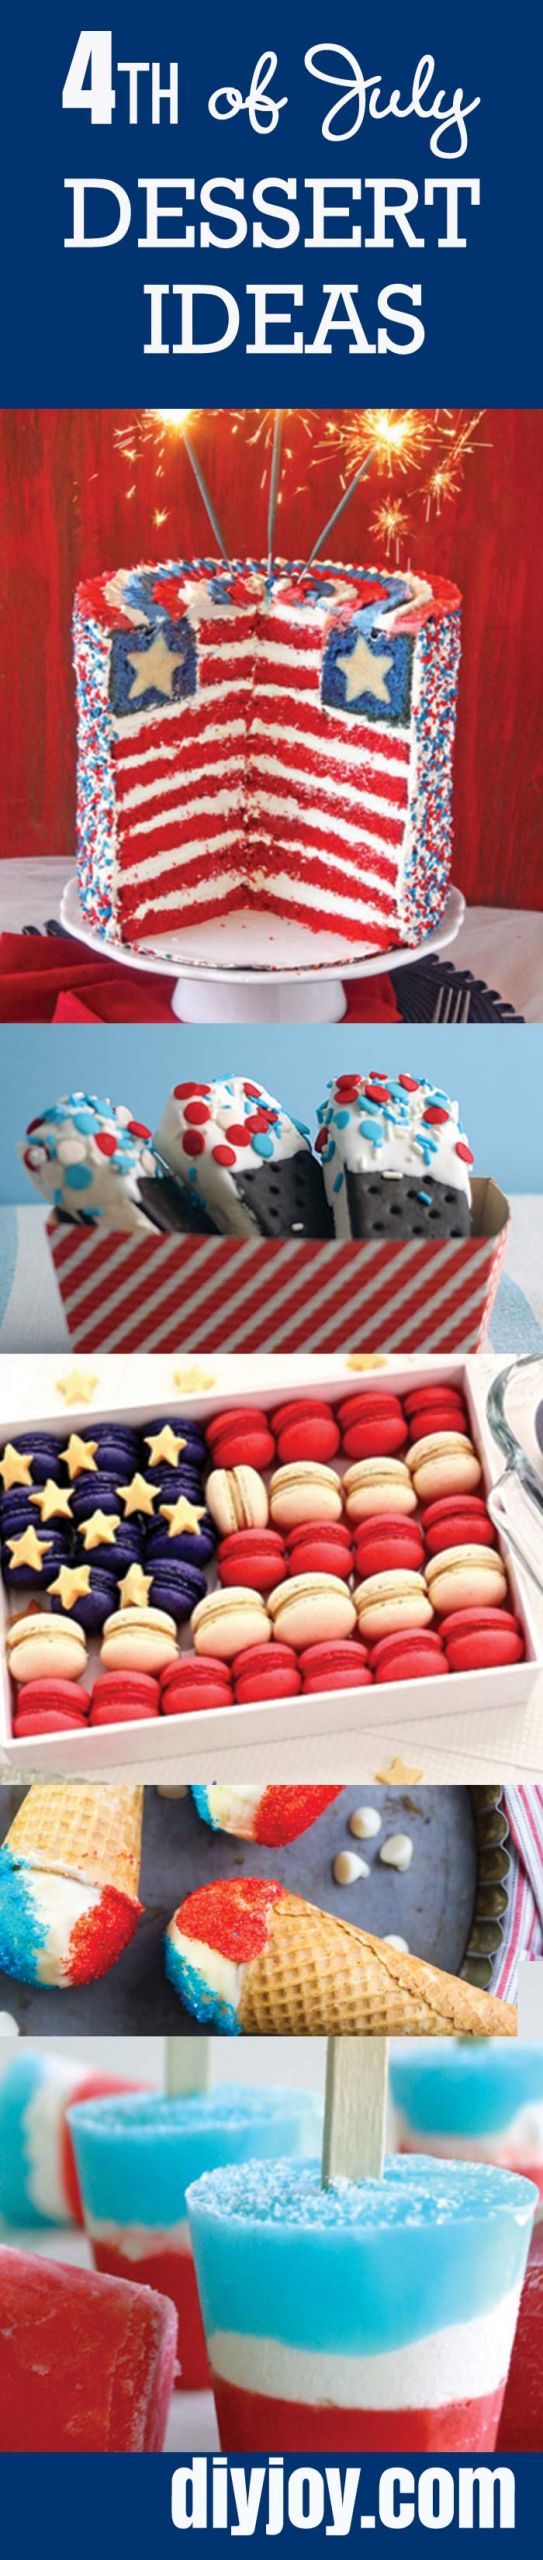 July 4Th Dessert Ideas
 4th of July Desserts and Patriotic Recipe Ideas